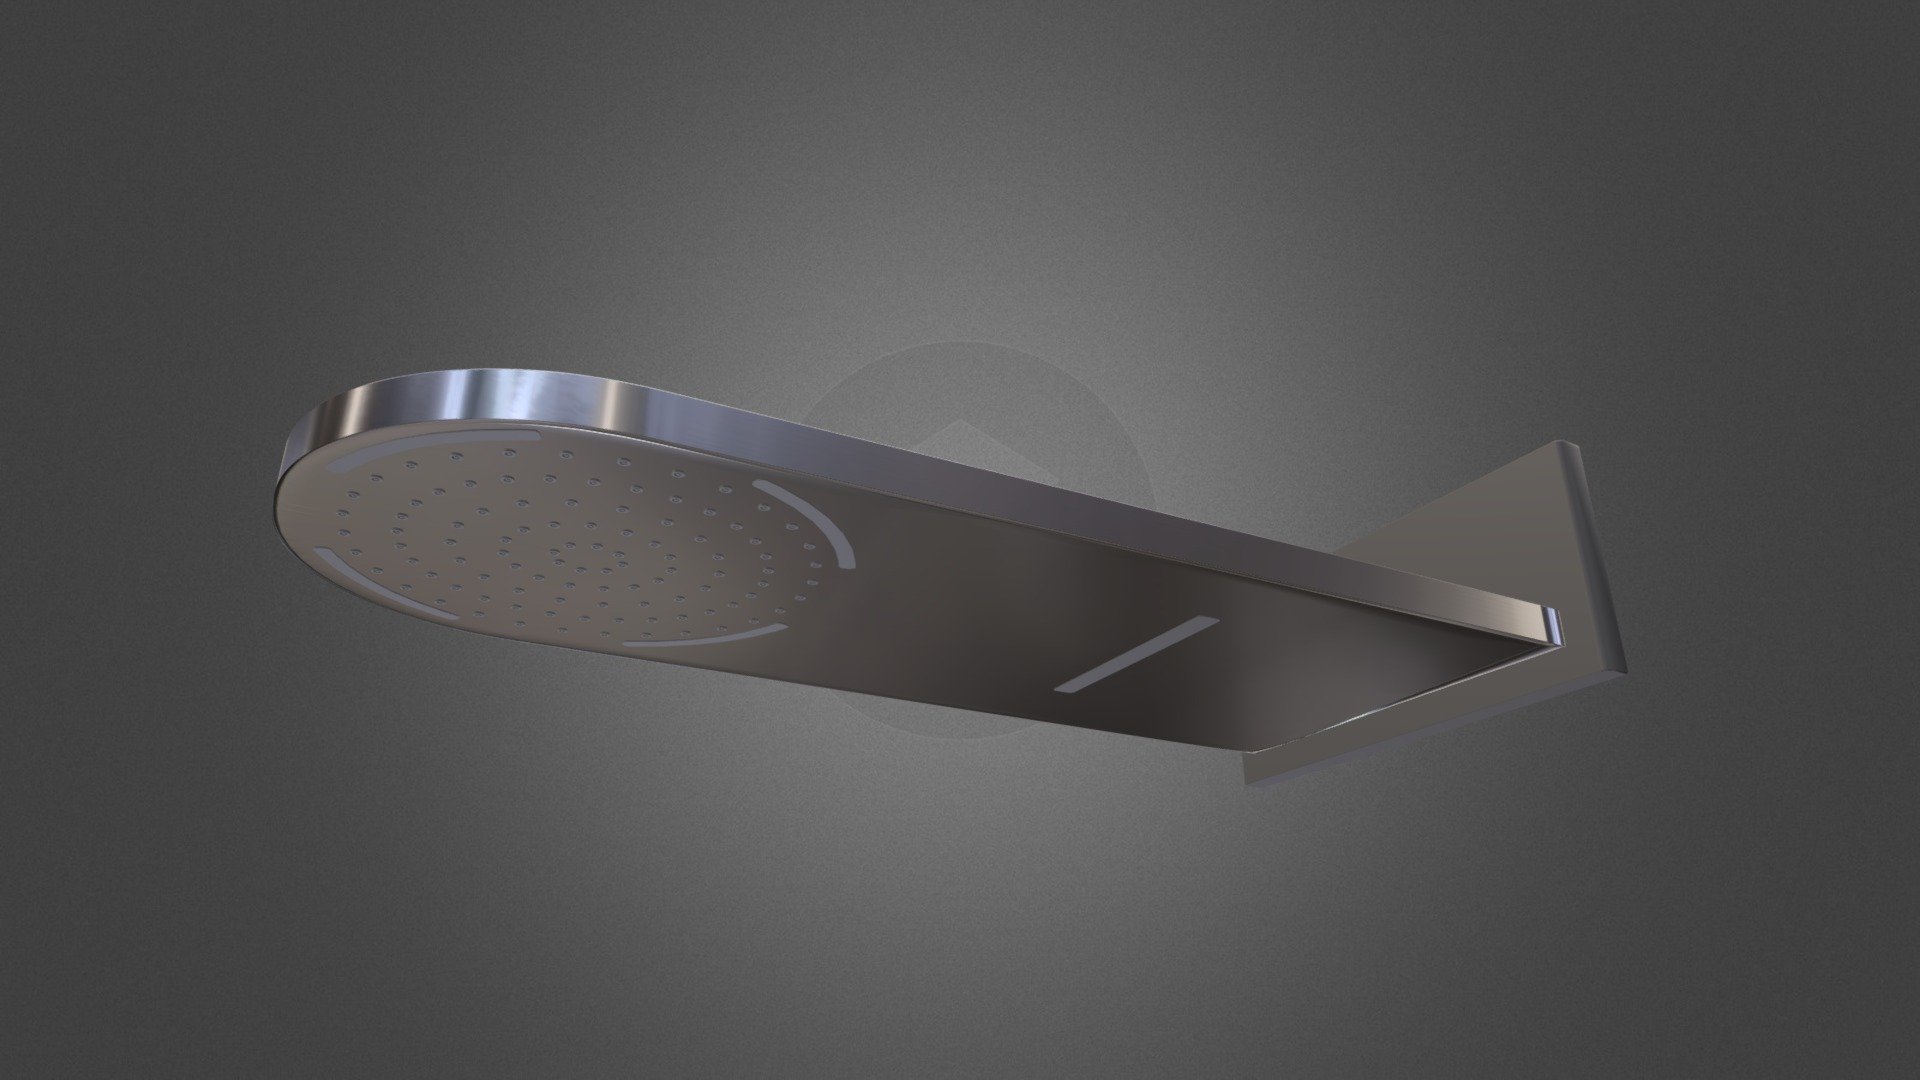 A shower head from Toto

TOTO Shower TX488SLED Adjustable Fixed Shower Head with Waterfall Spray &amp; LED

I haven't added the LED material, but you can easily add into the model - Toto Shower TX488SLED - Buy Royalty Free 3D model by ditovirnantio 3d model